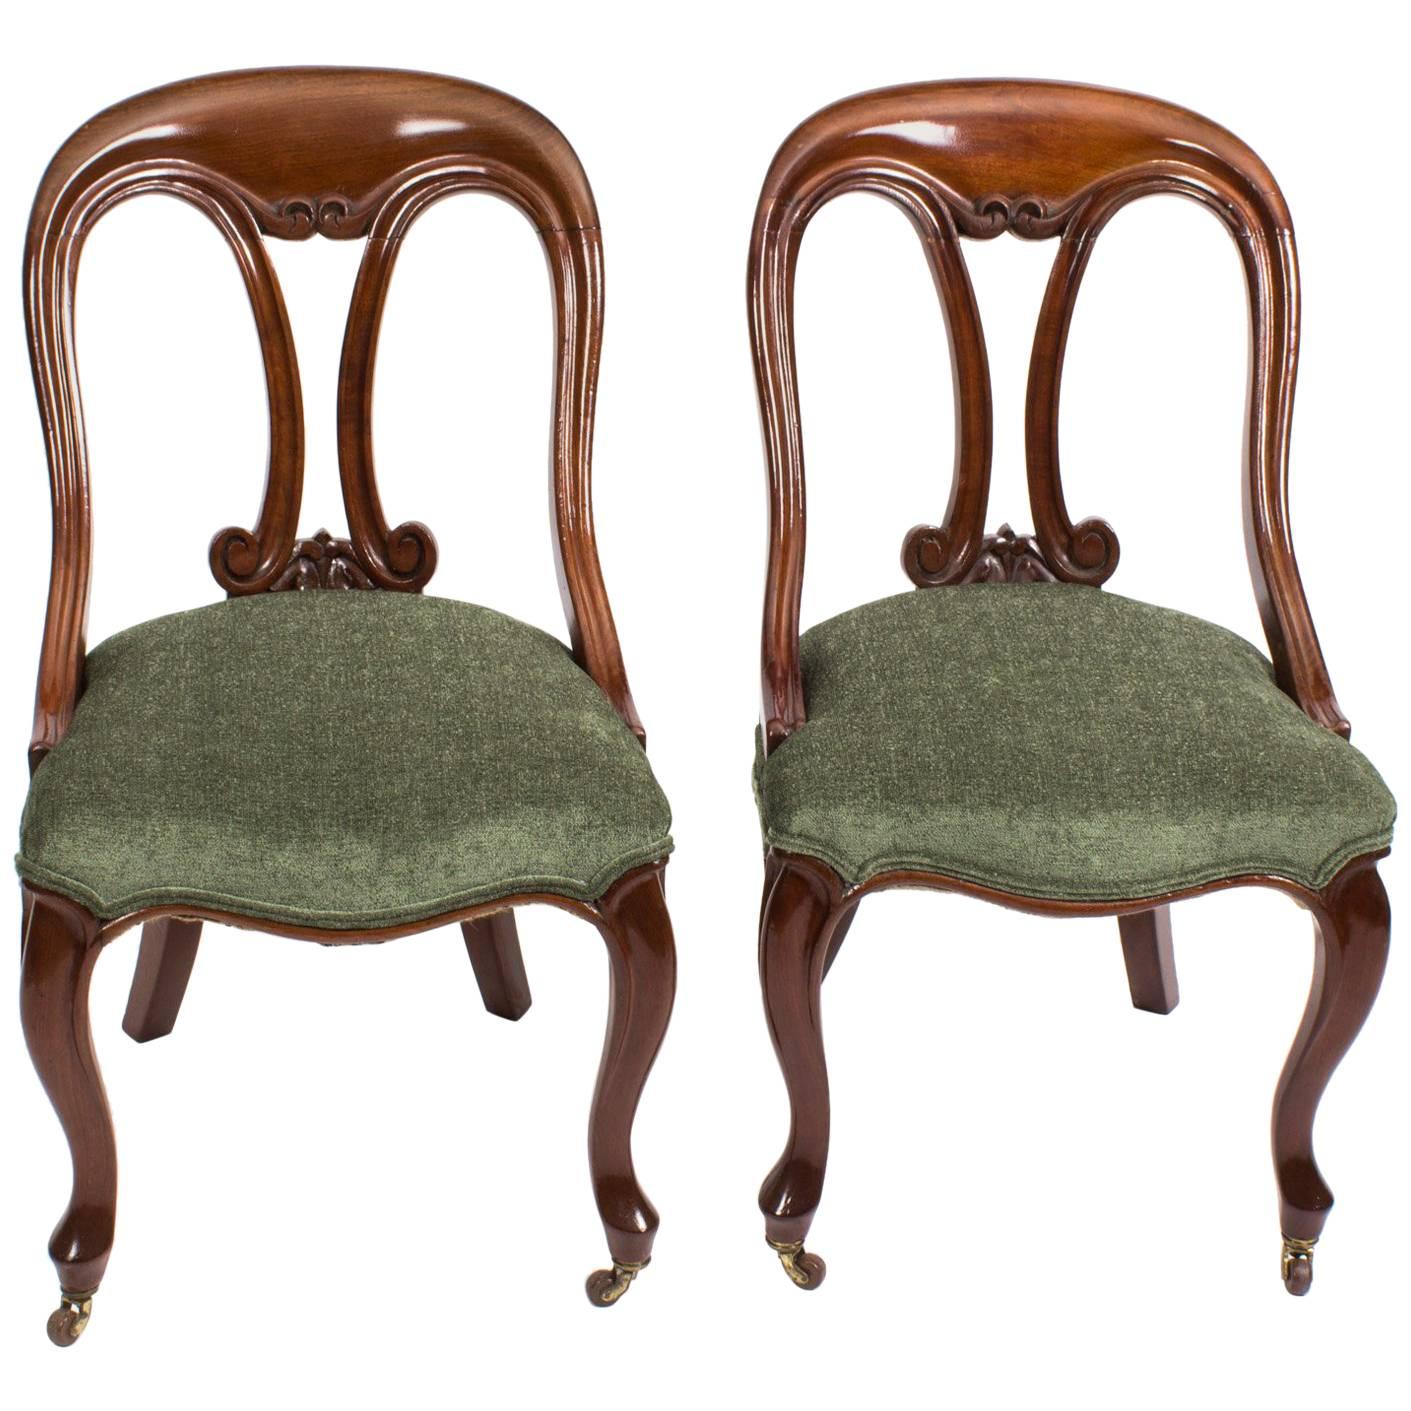 19th Century Pair of Victorian Mahogany Fiddle Back Side Chairs